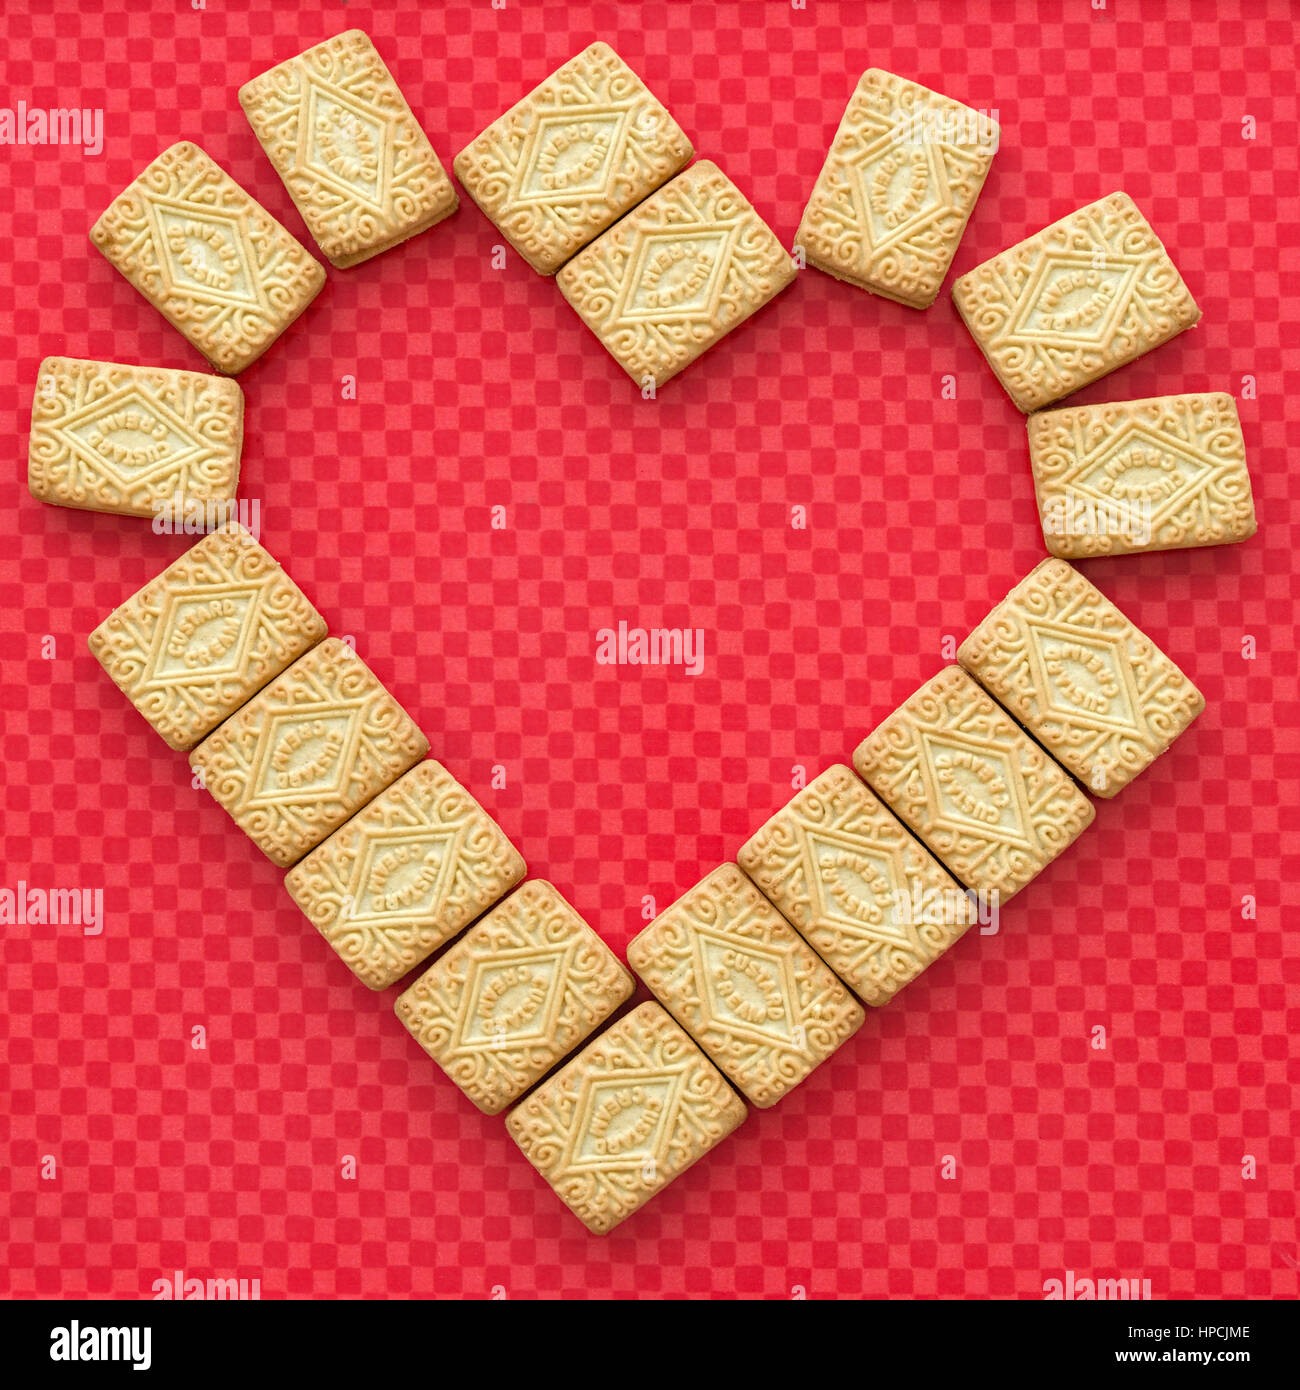 Valentines day love heart made from custard cream biscuits arranged on pink background Stock Photo